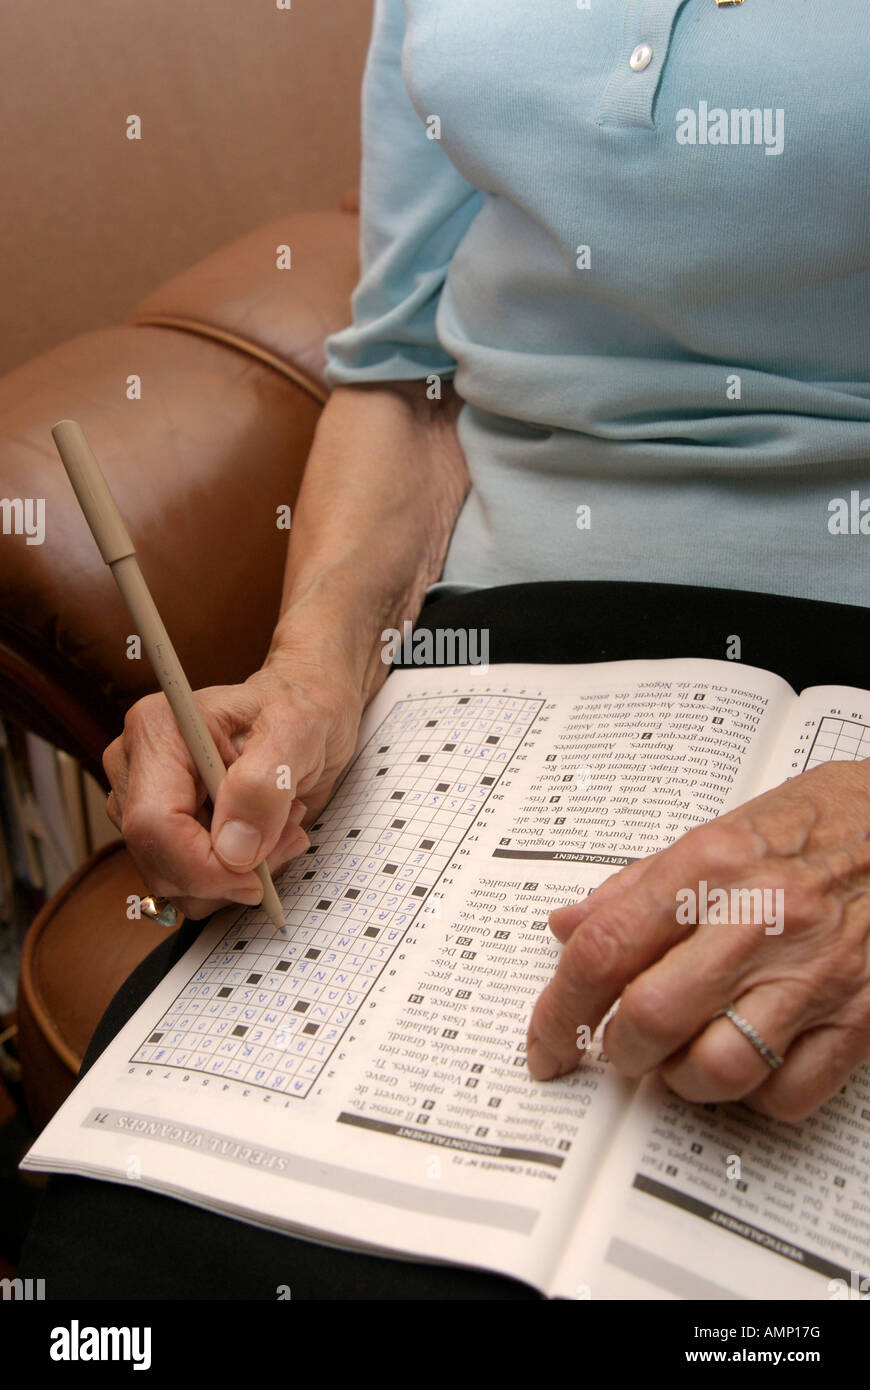 Hands of an elderly woman doing a crossword puzzle Stock Photo